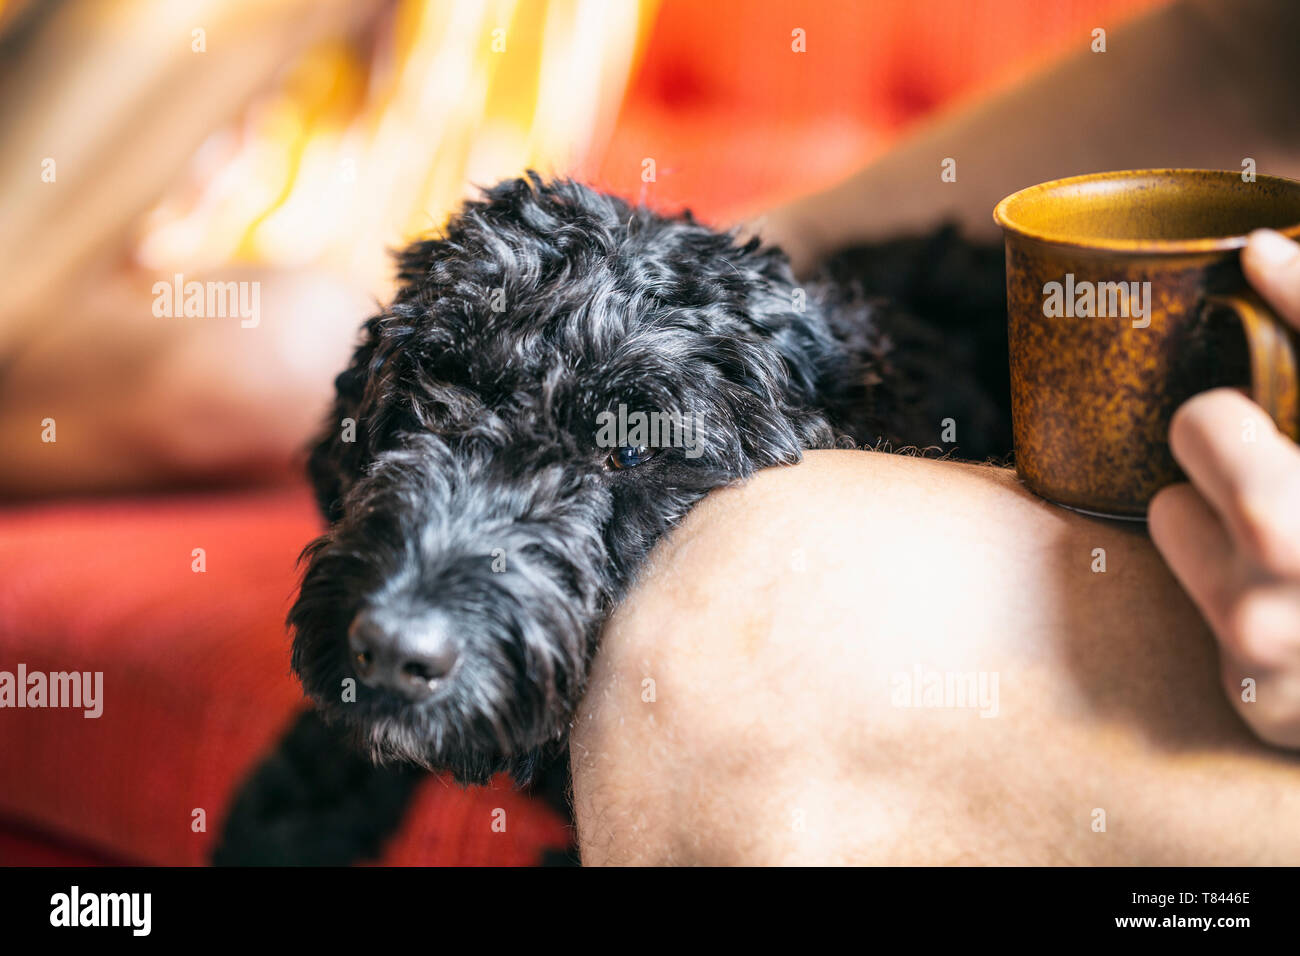 Pet dog and owner on sofa Stock Photo